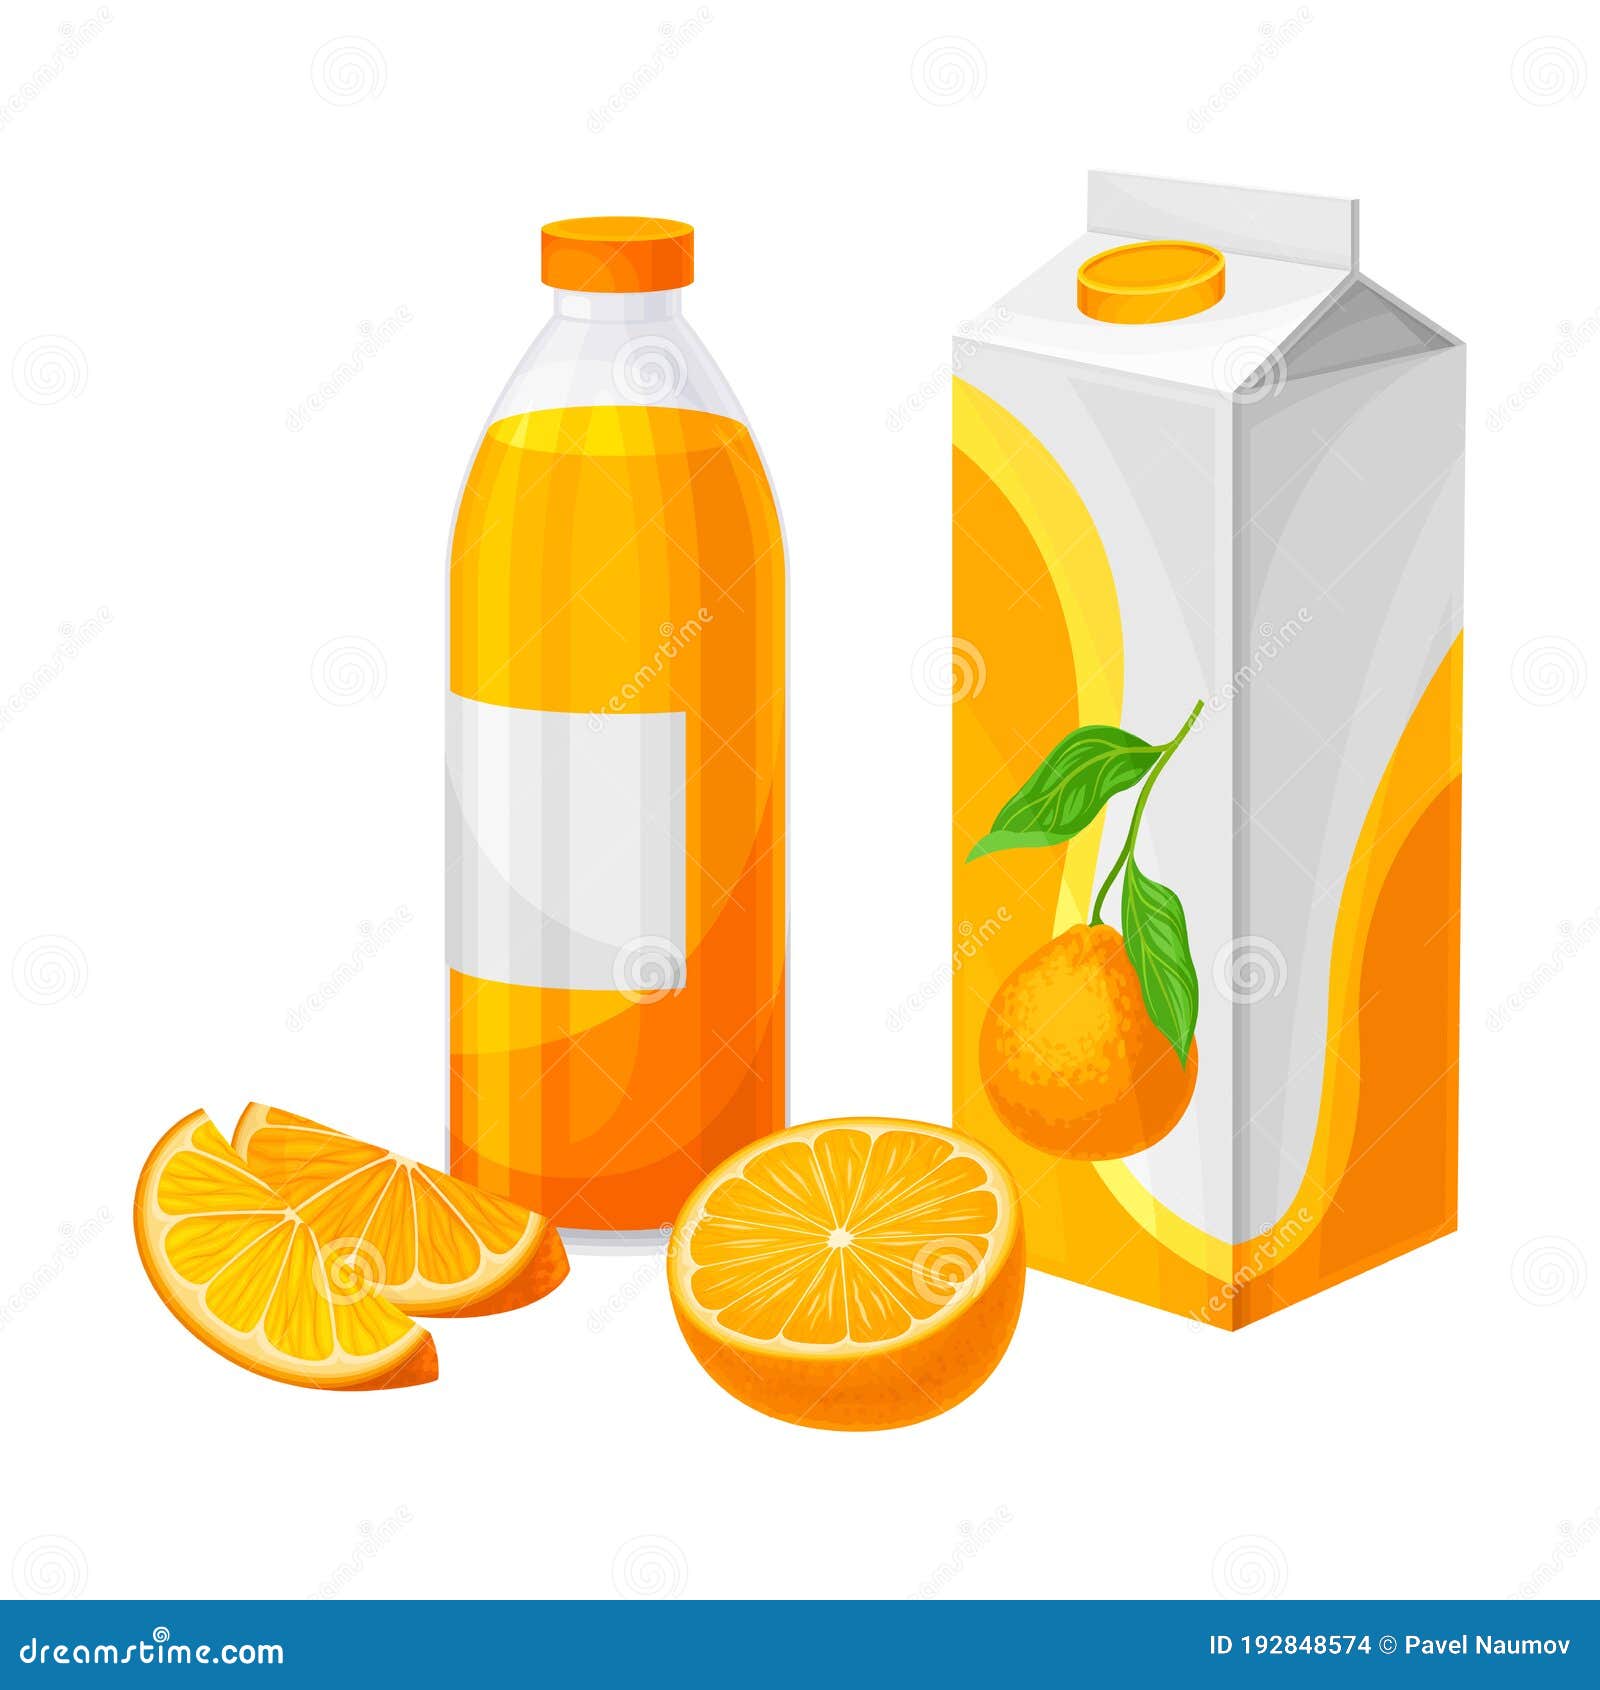 Orange Juice in Carton and Bottle As Finished Product Consumption Vector  Illustration Stock Vector - Illustration of ingredient, citrus: 192848574